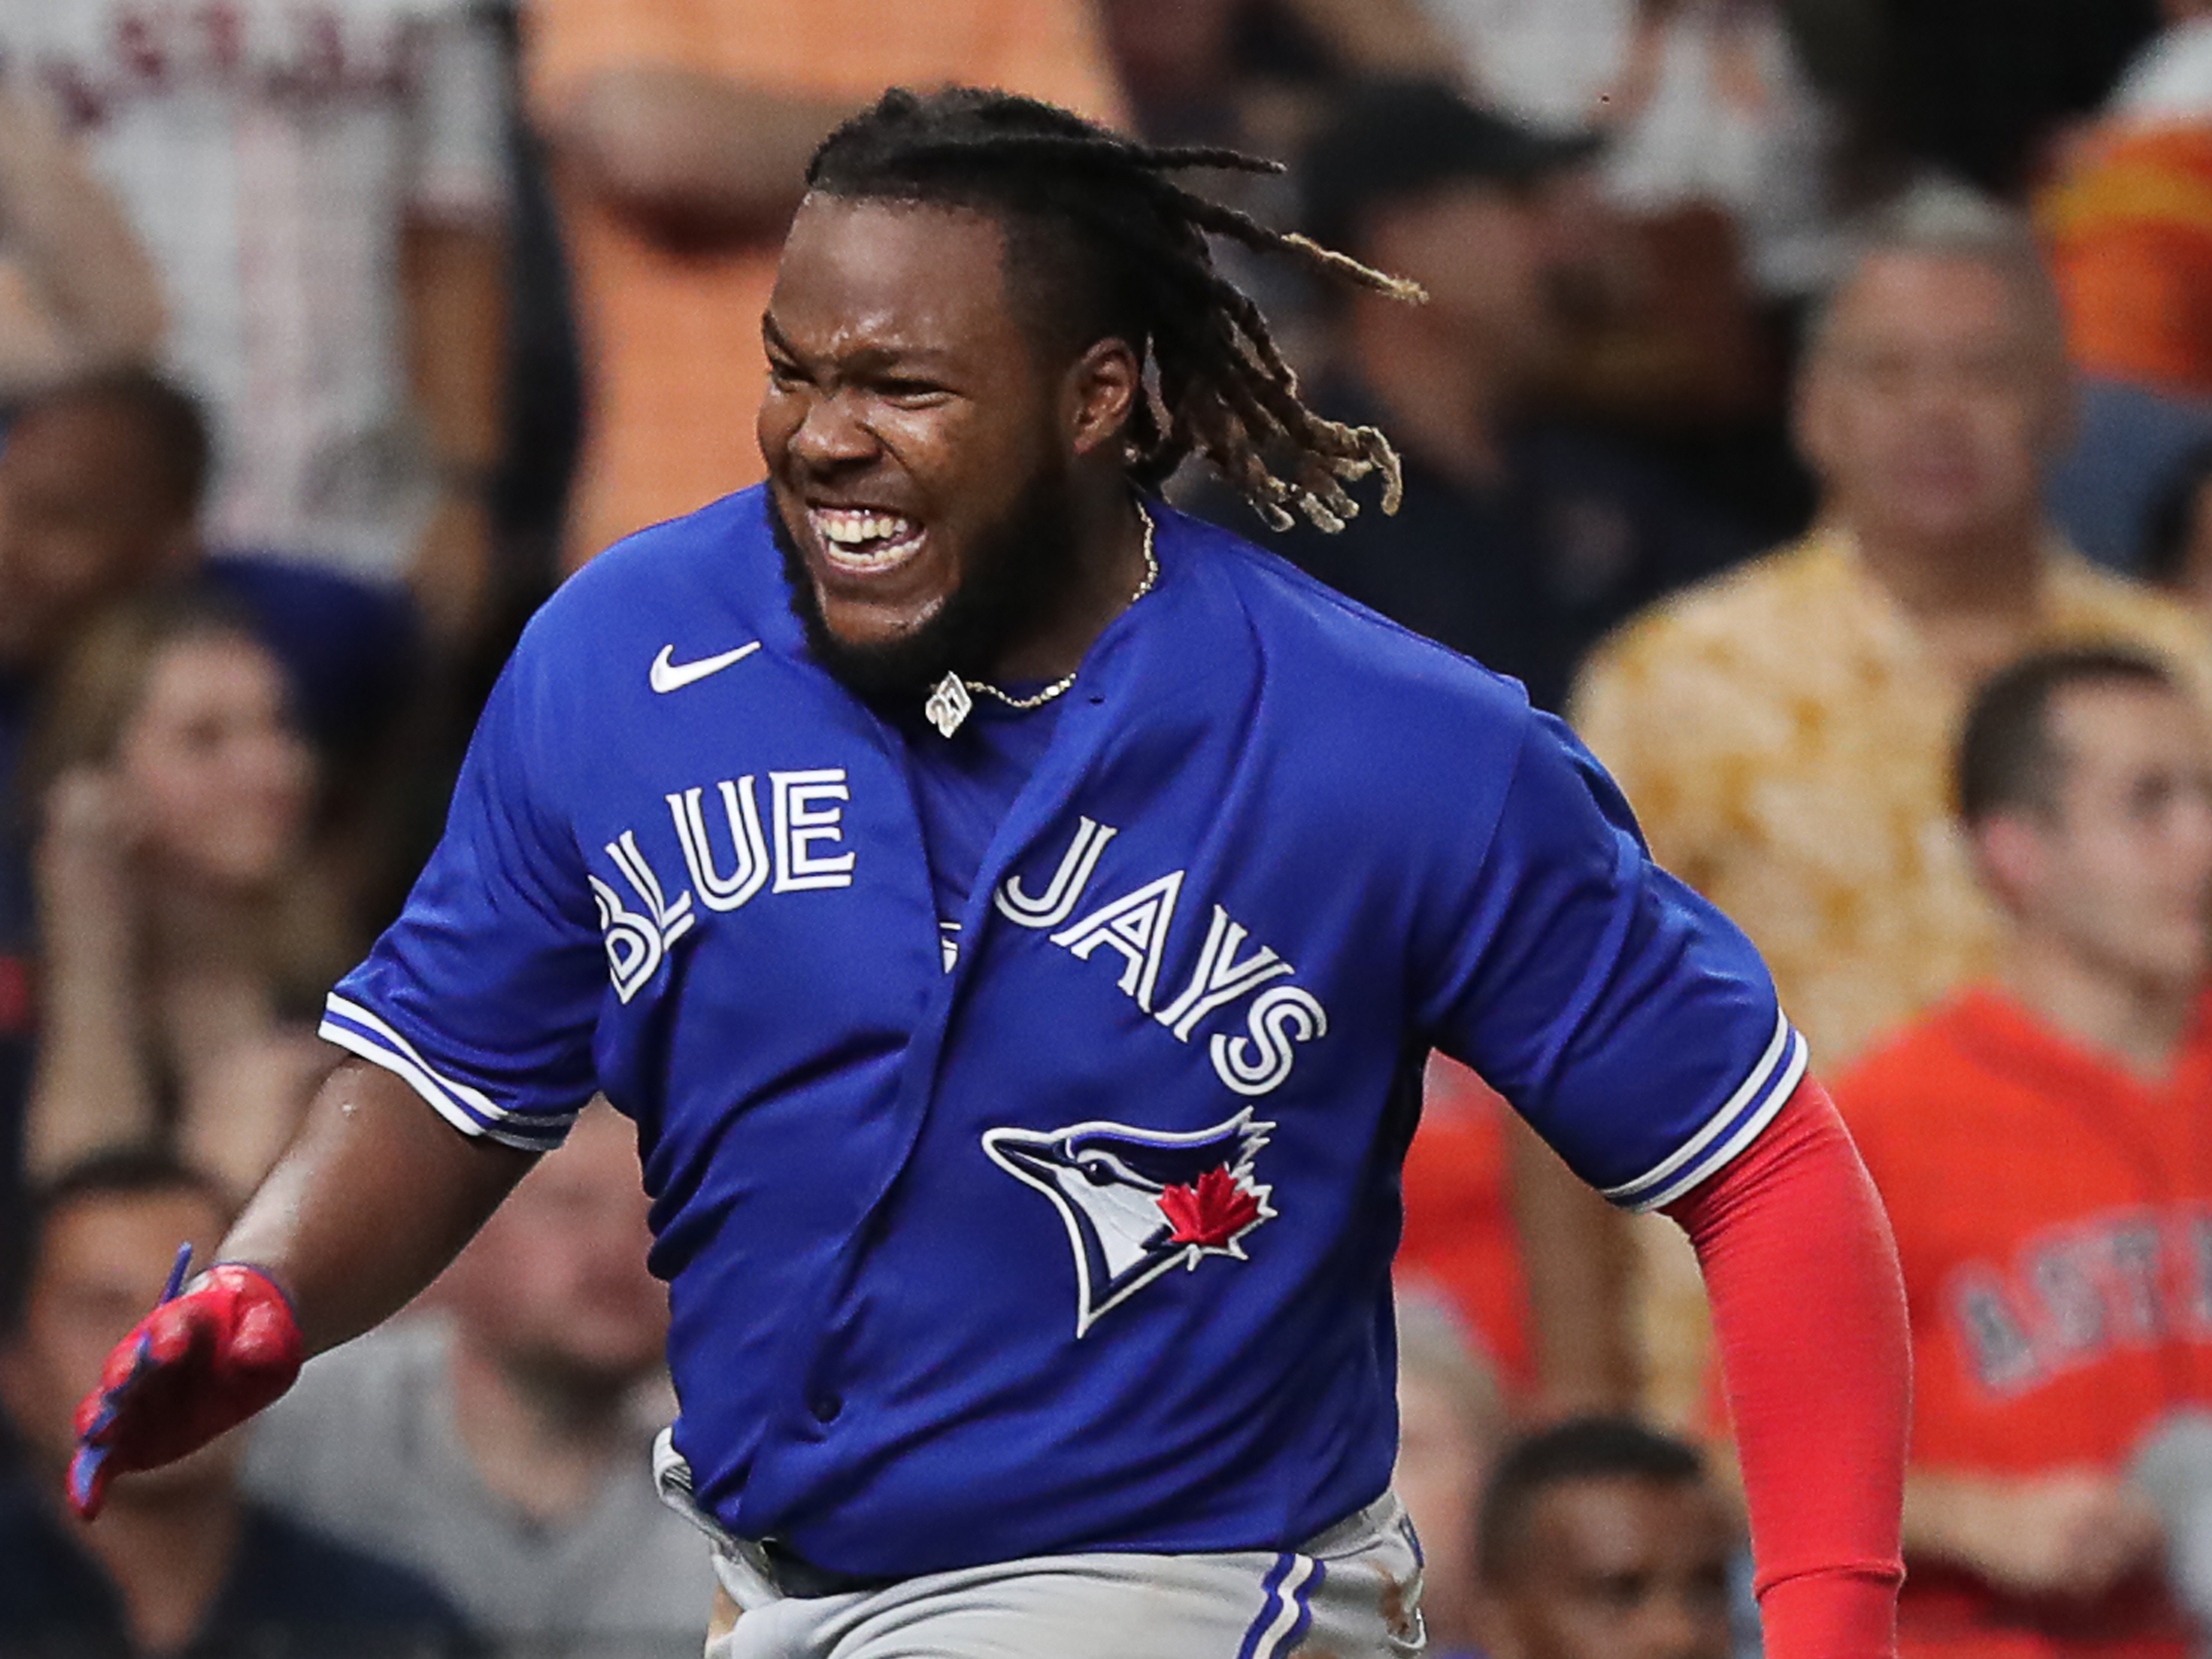 Chapman double in 9th leads Blue Jays over Astros 4-3 